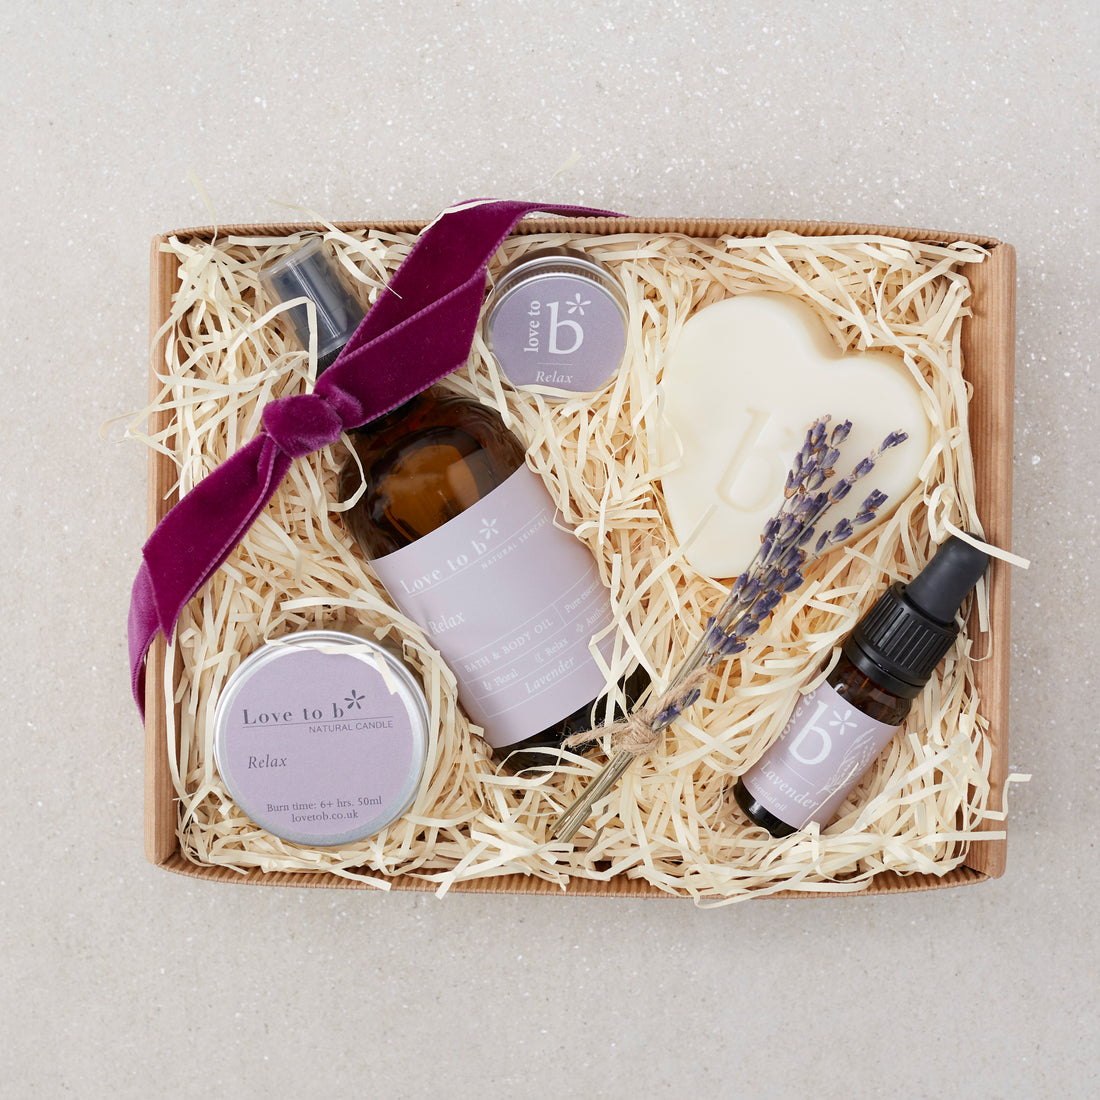 Mum to B / Ultimate Relaxation Gift Box